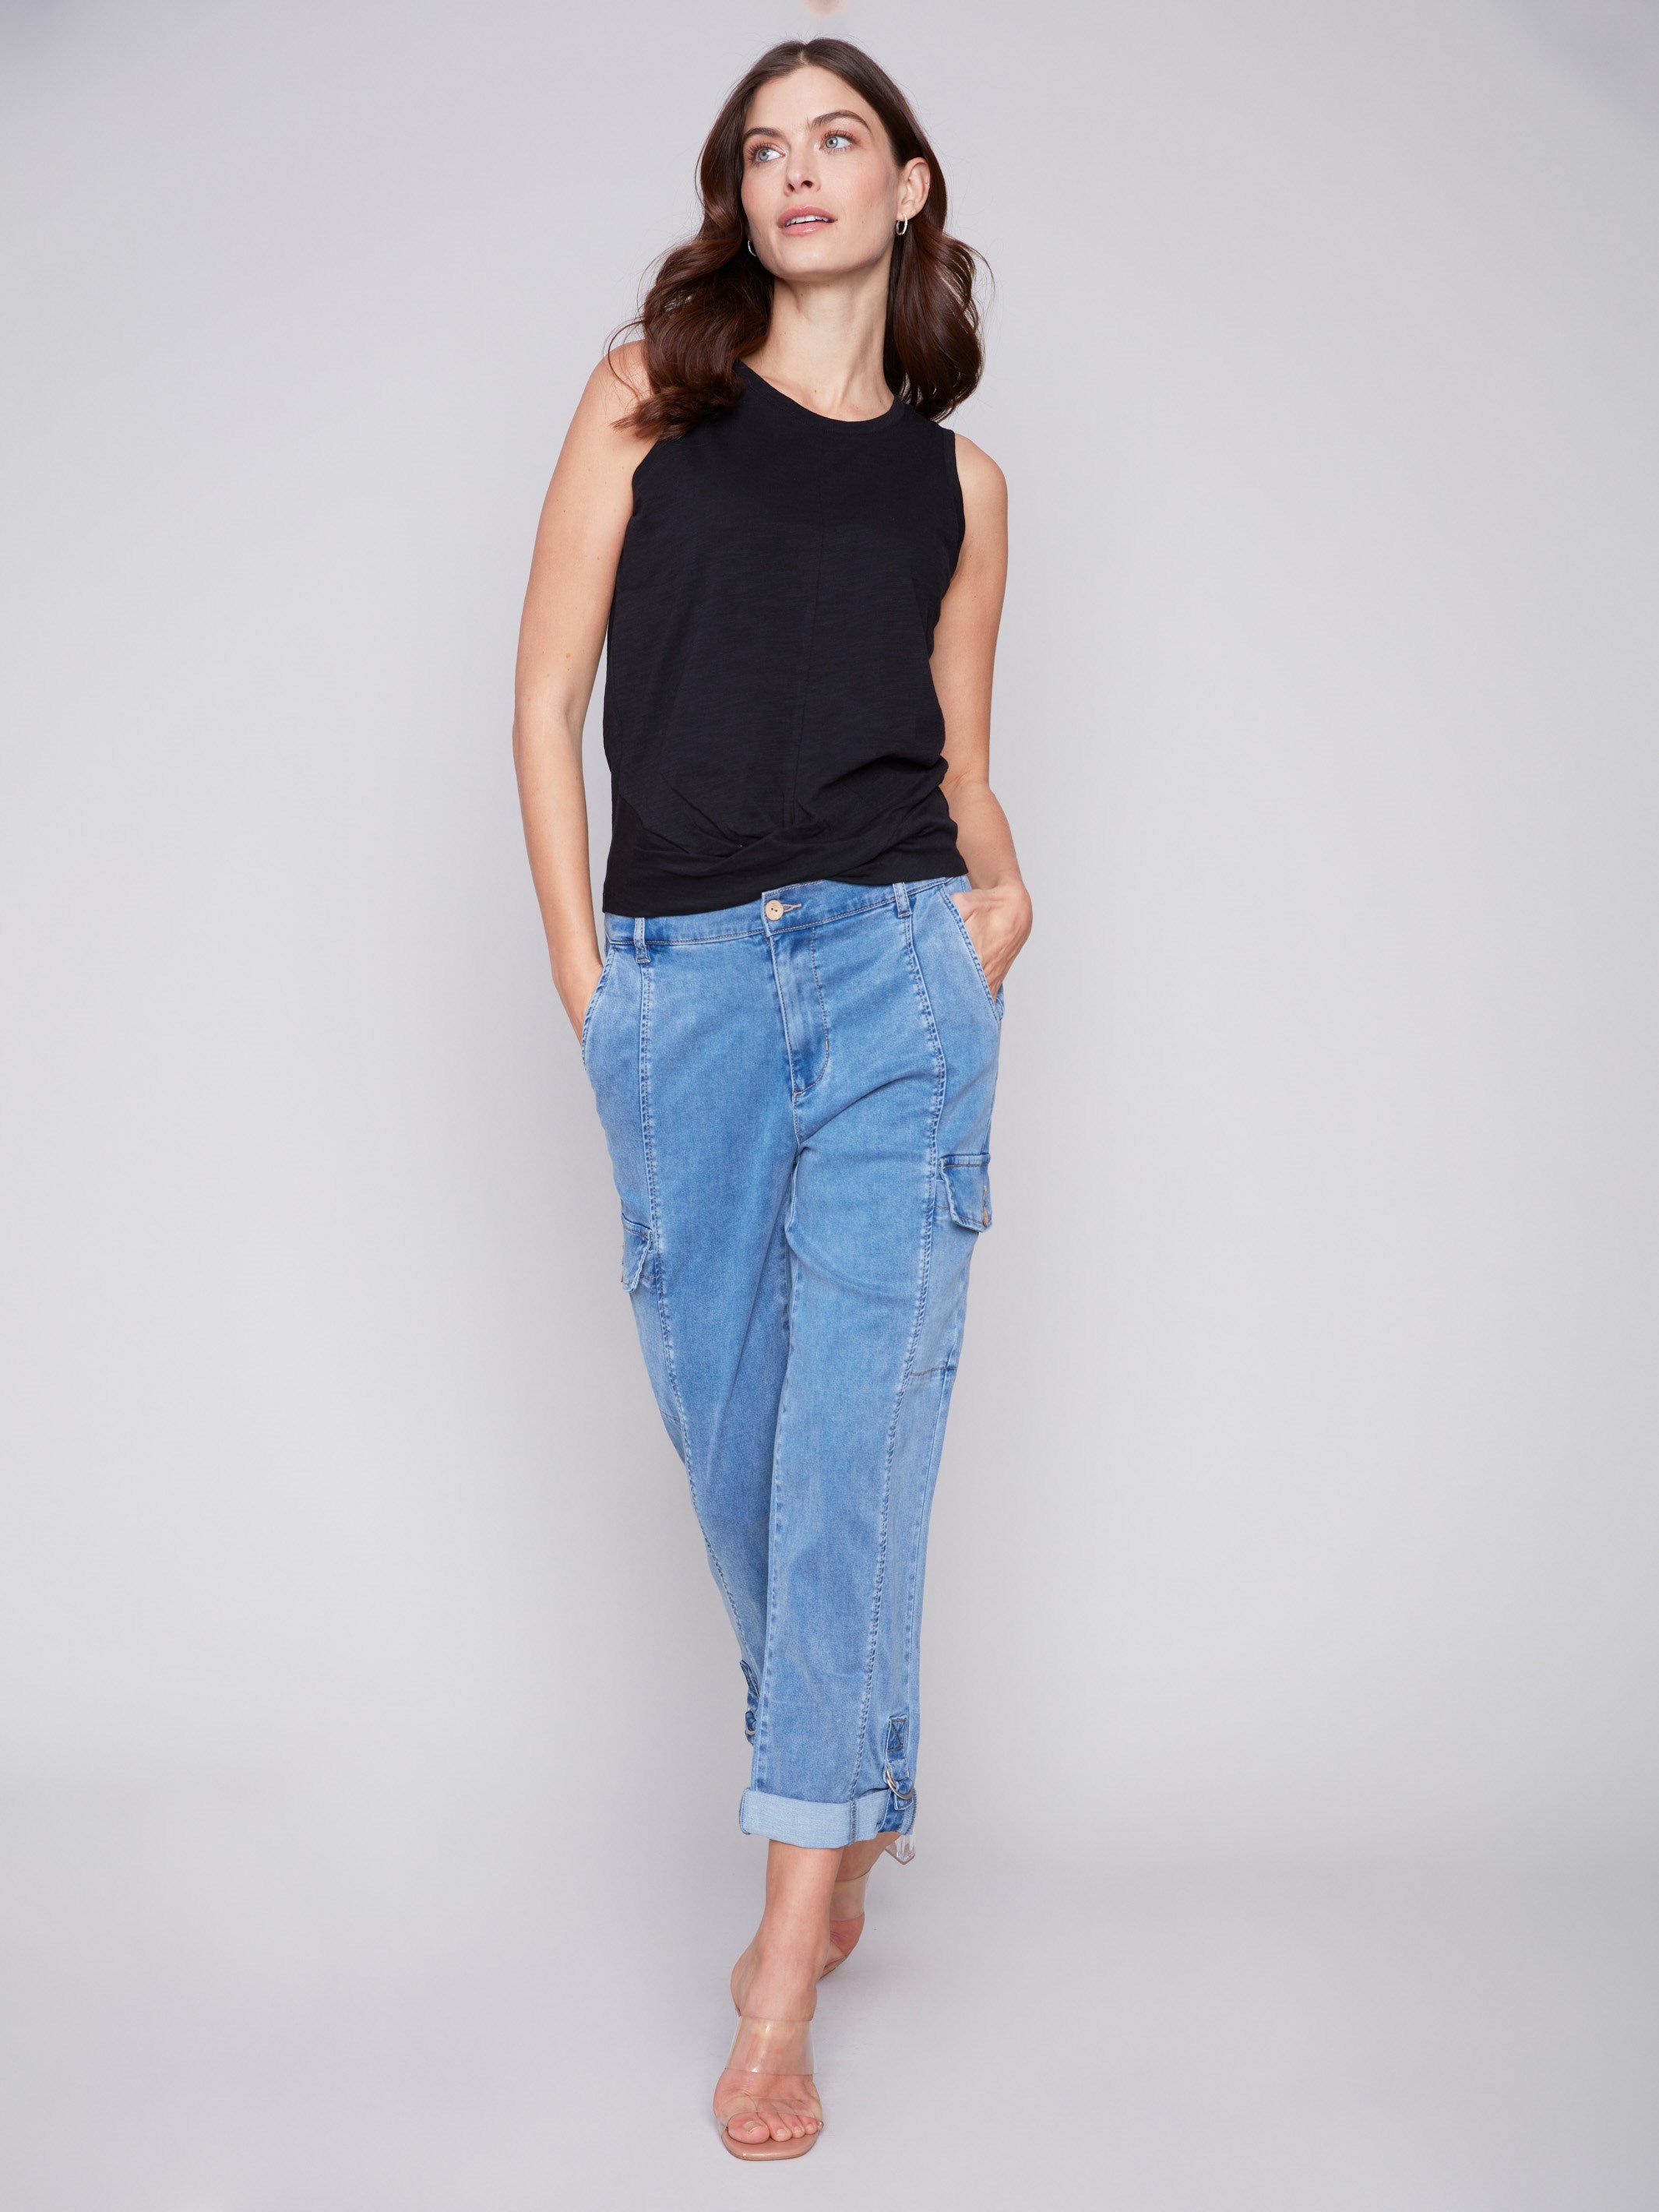 Canvas Cargo Pants - Chambray - Charlie B Collection Canada - Image 1